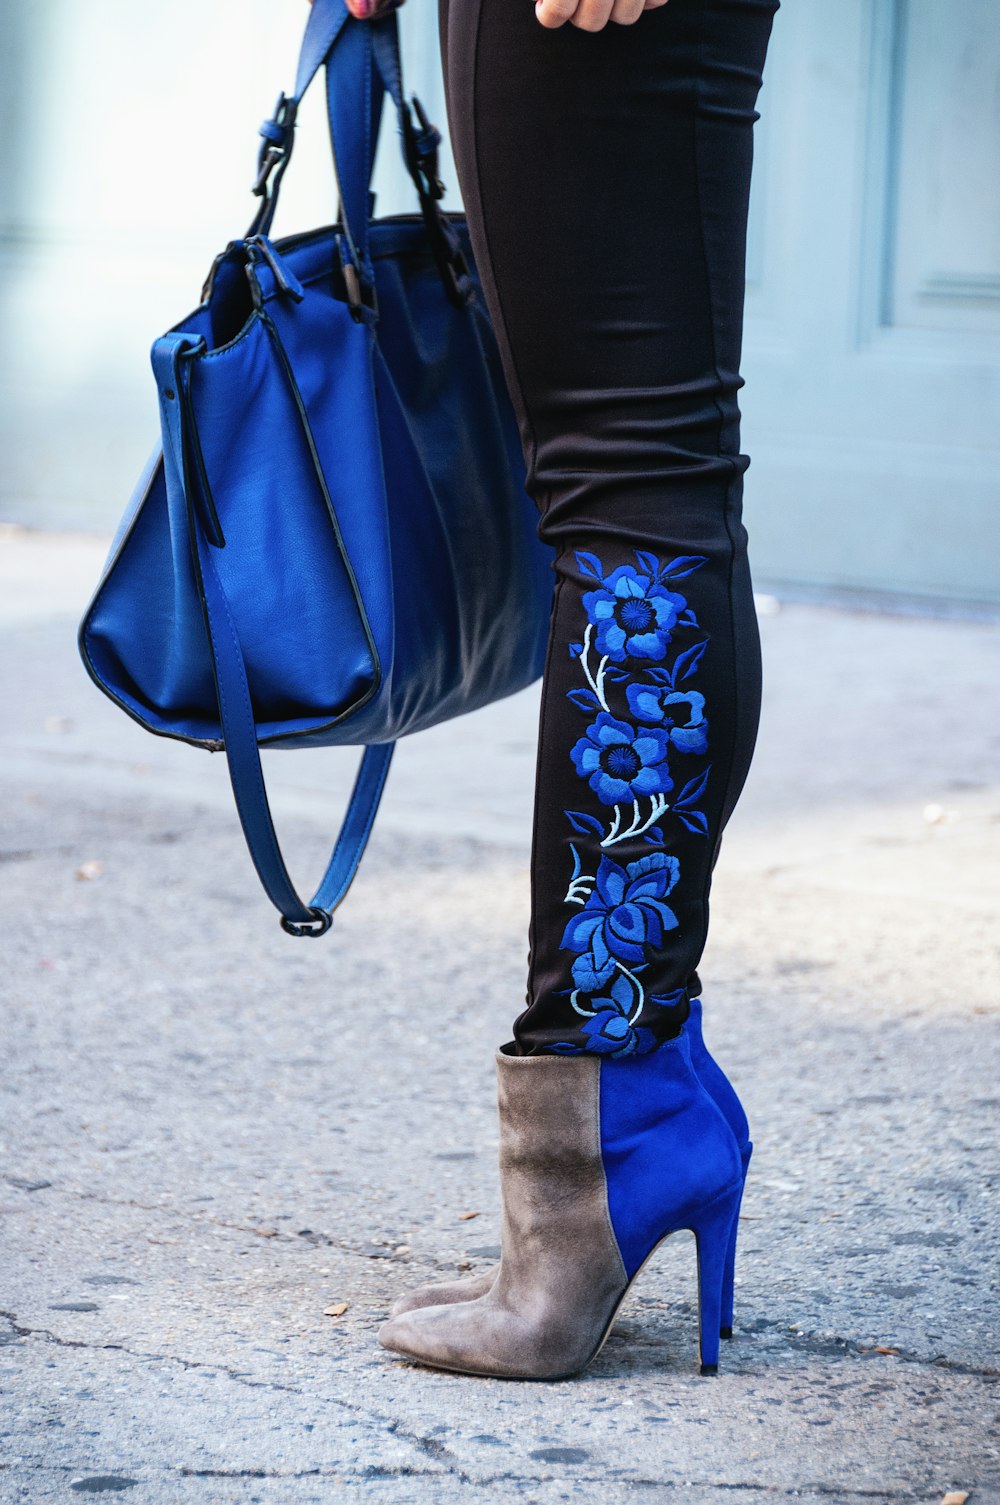 person in black leggings, booties and carrying blue bag